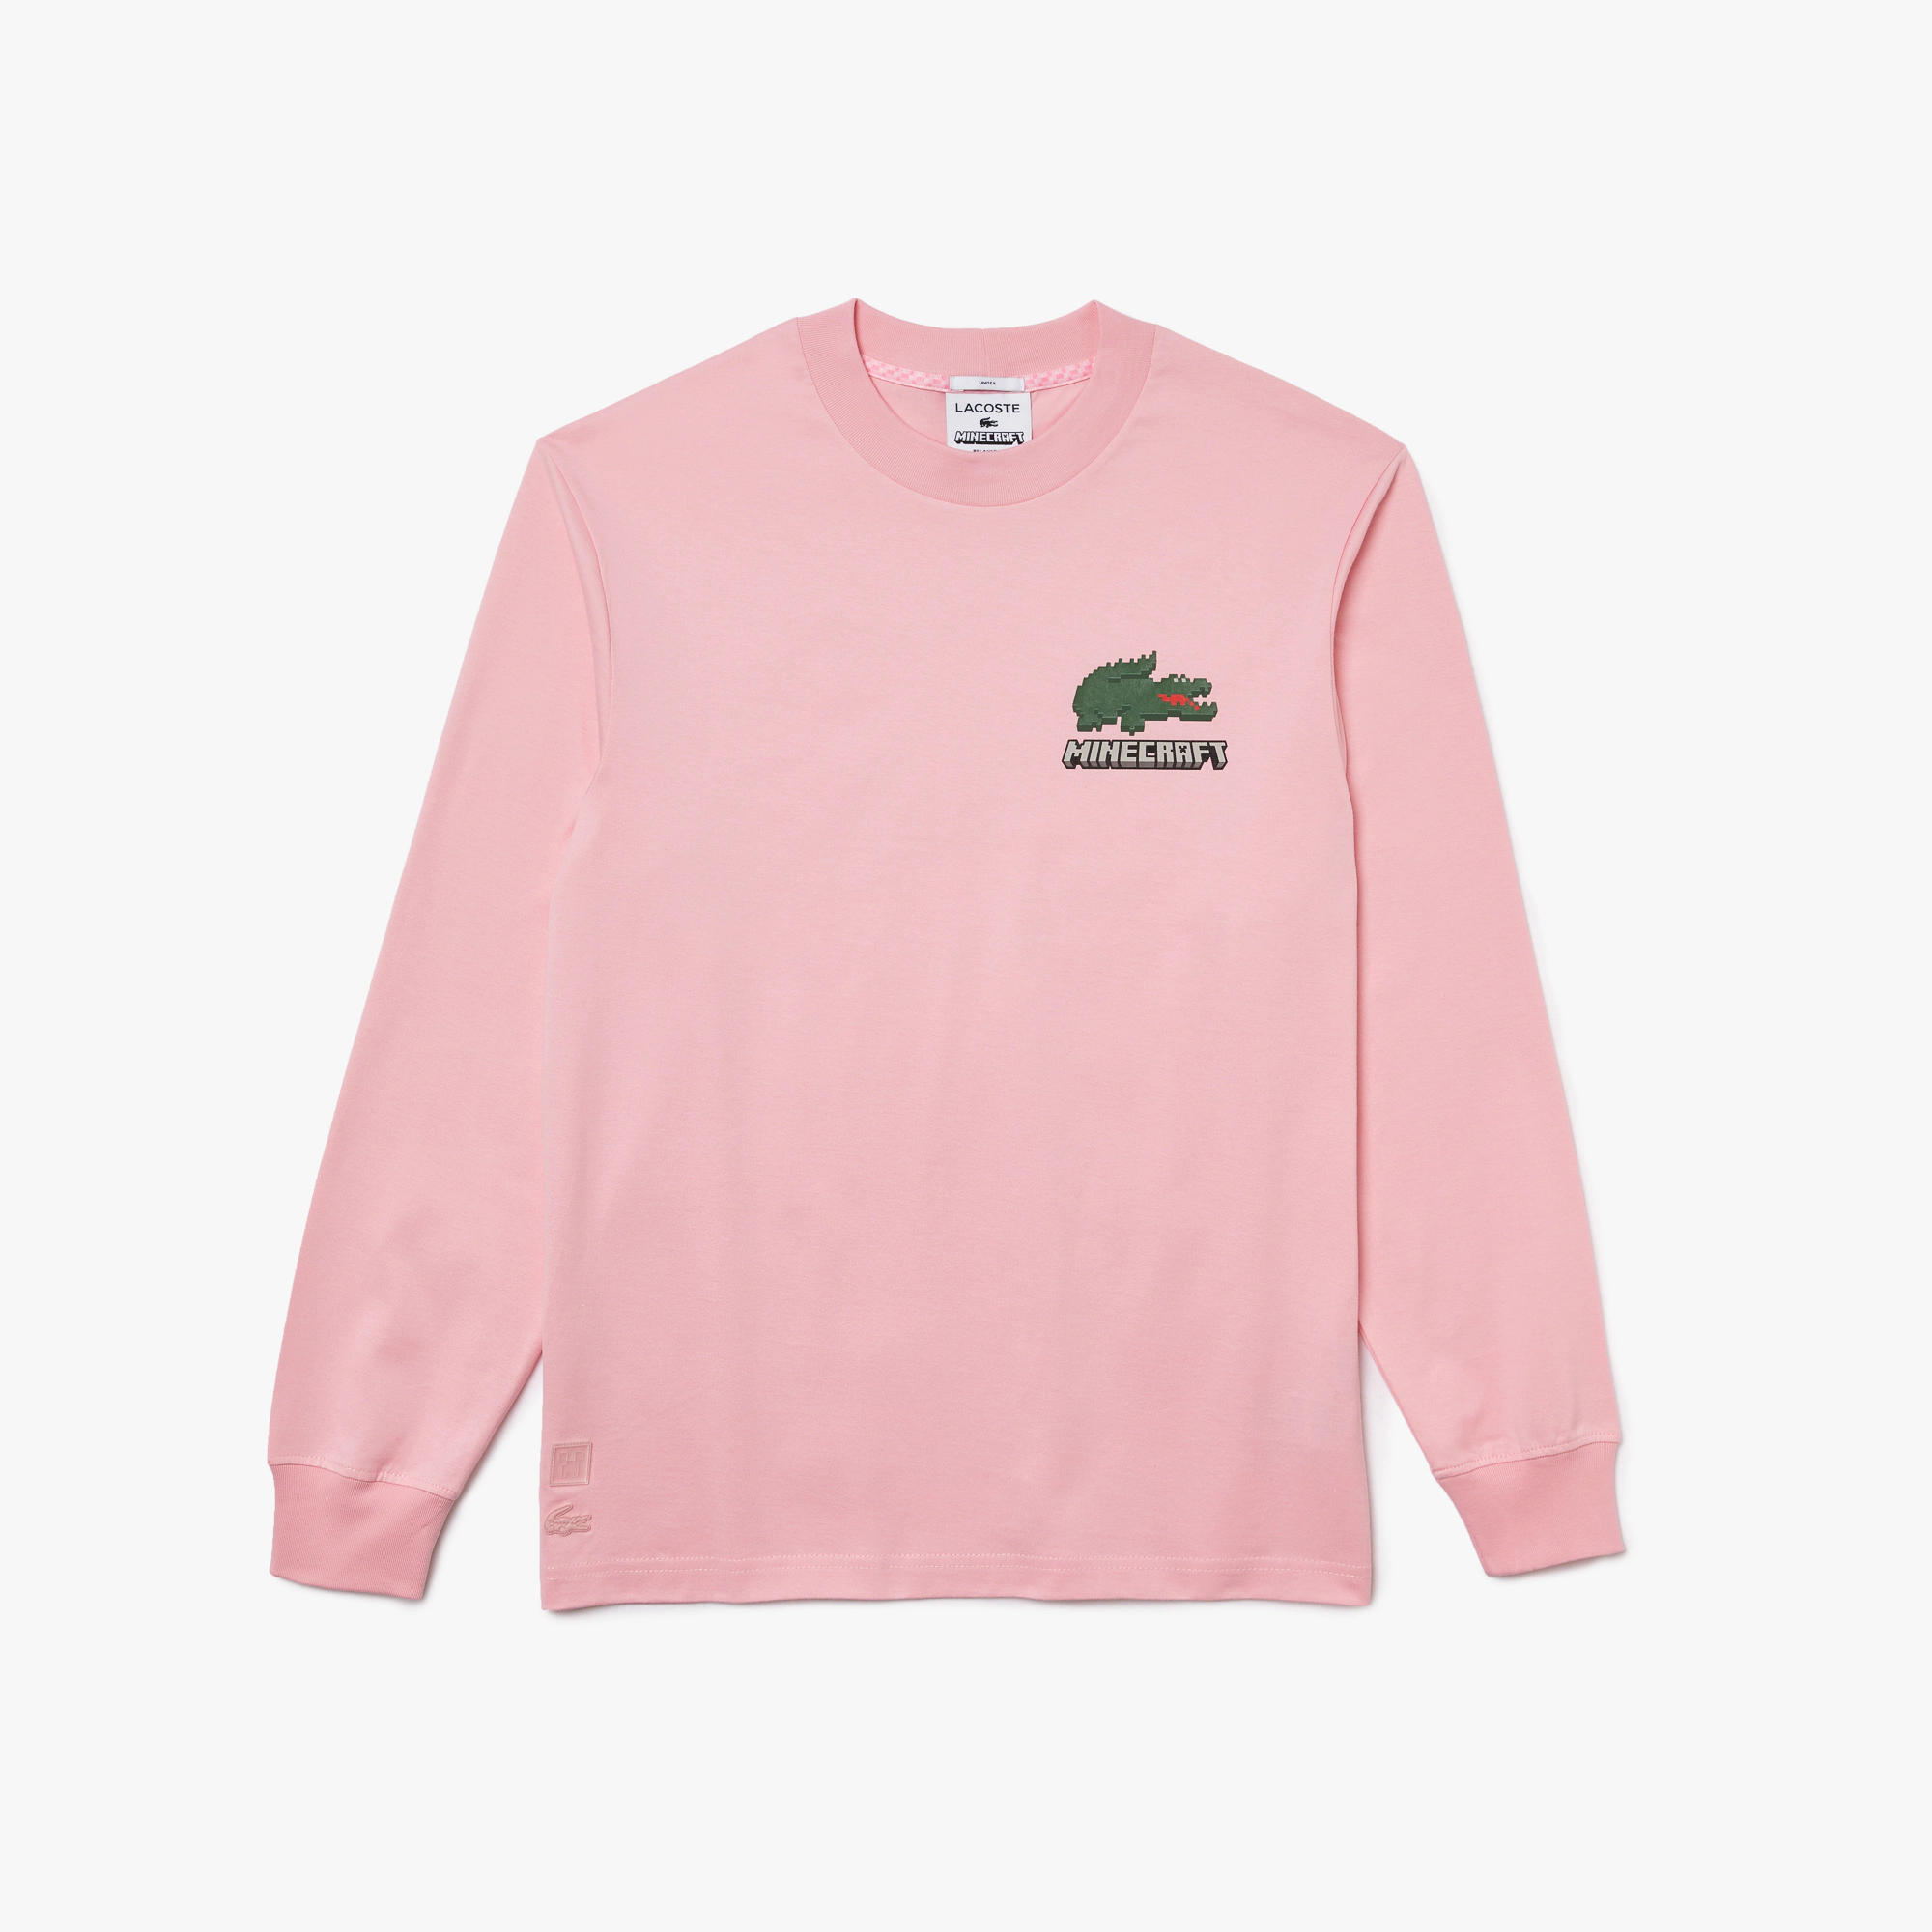 Lacoste Unisex Lacoste X Minecraft Organic Cotton Long Sleeve T-Shirt Lotus TH5039-51 7SY.